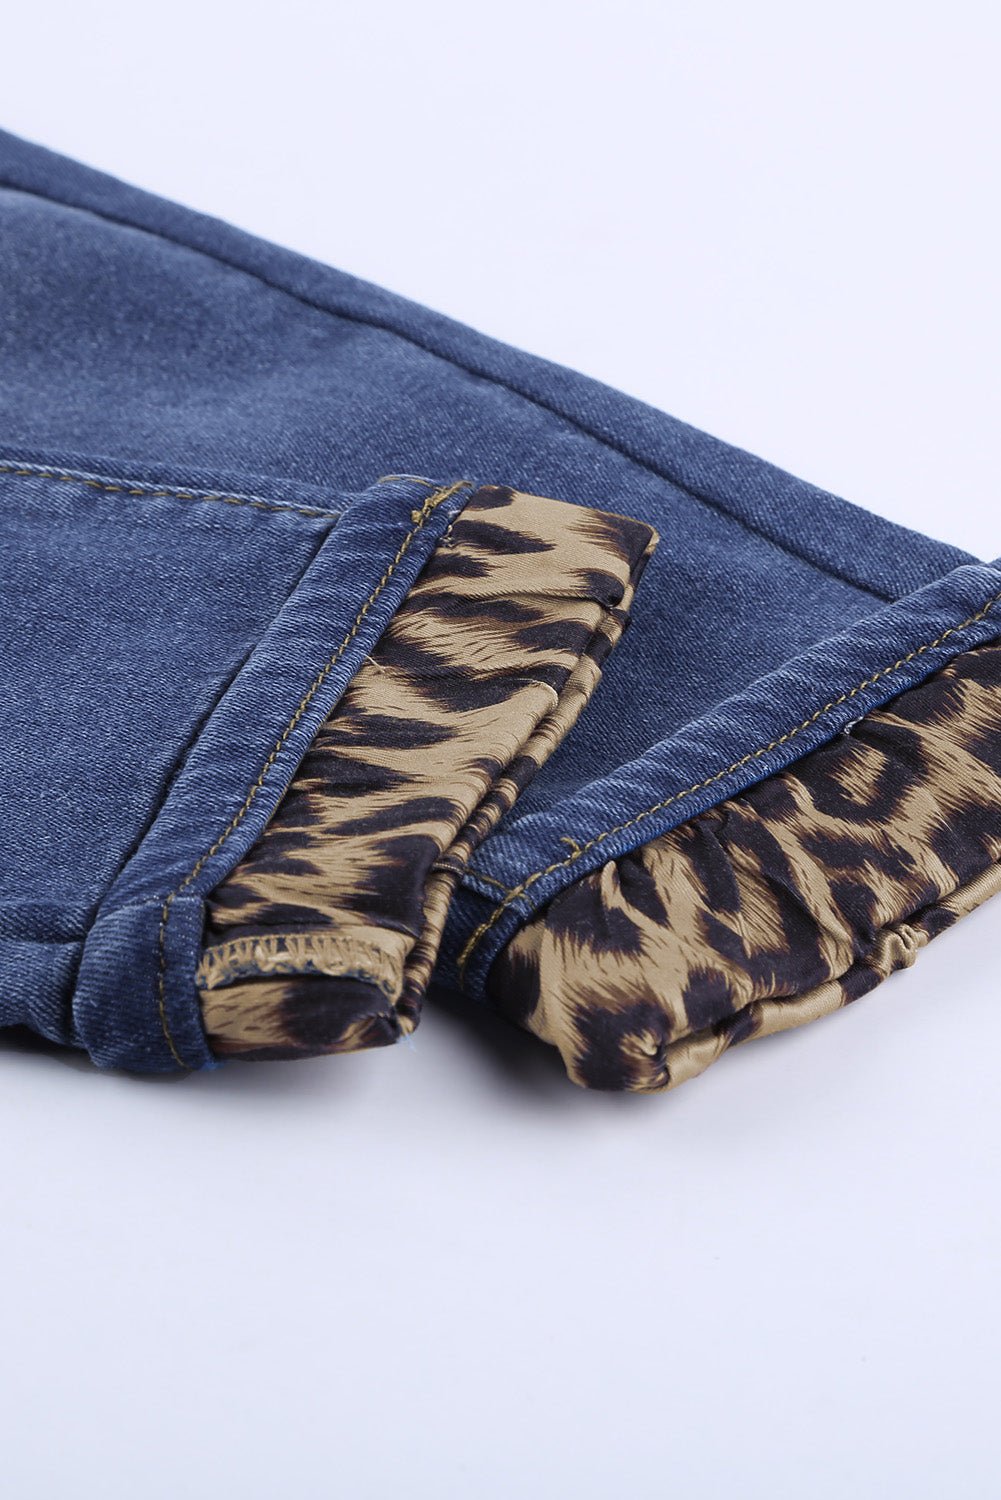 Leopard Patchwork Distressed Jeans - Bakers Shoes store